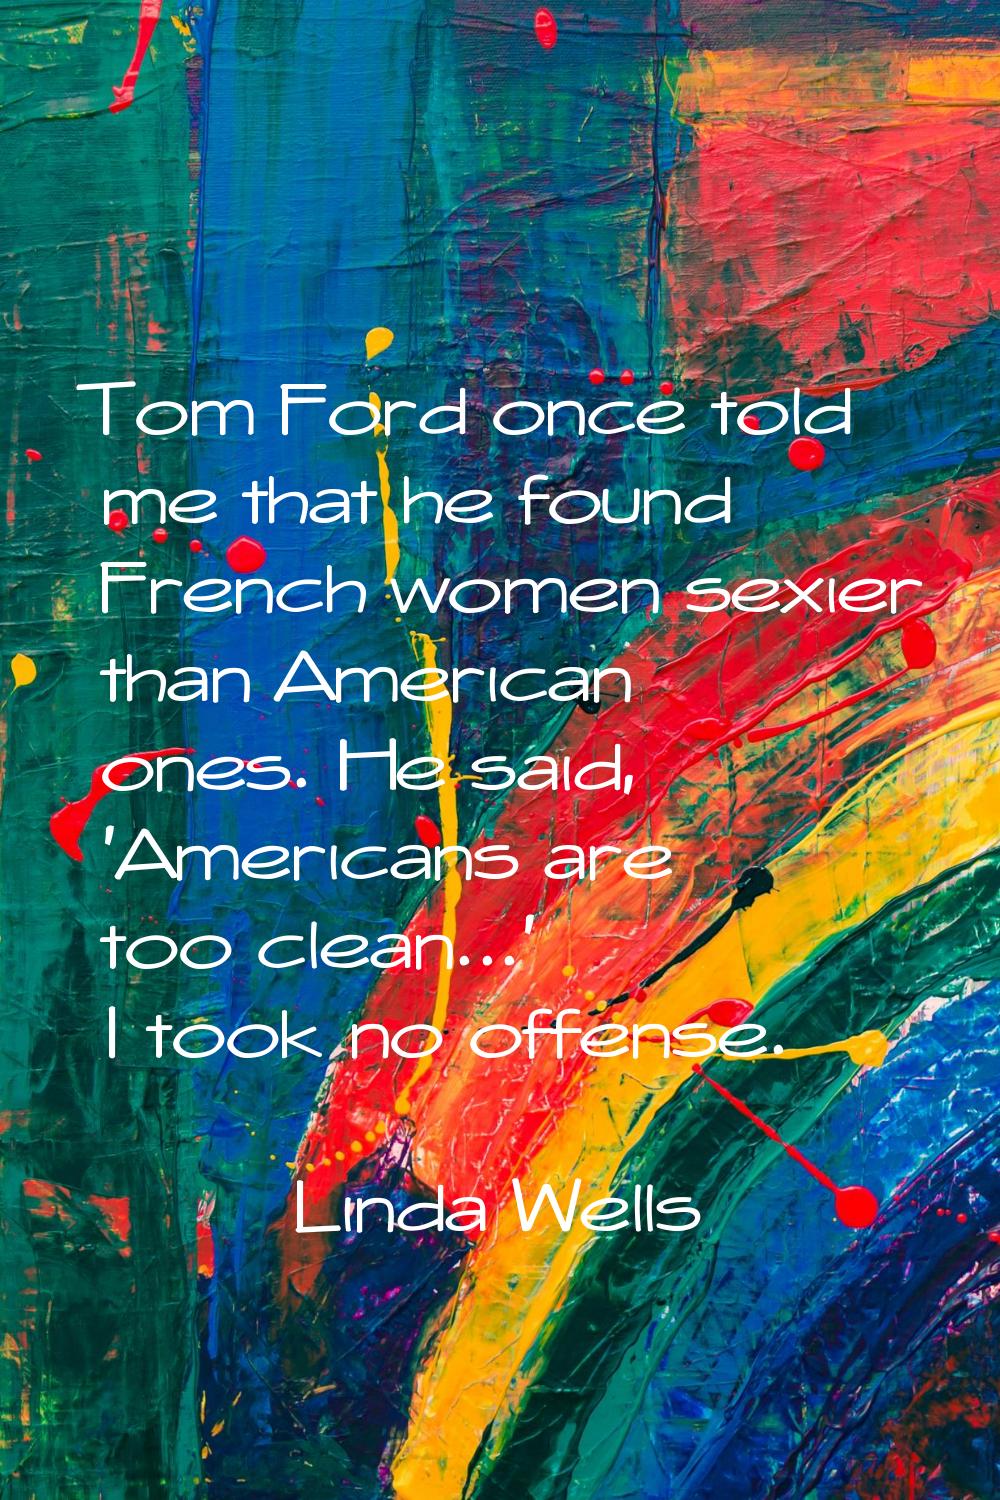 Tom Ford once told me that he found French women sexier than American ones. He said, 'Americans are